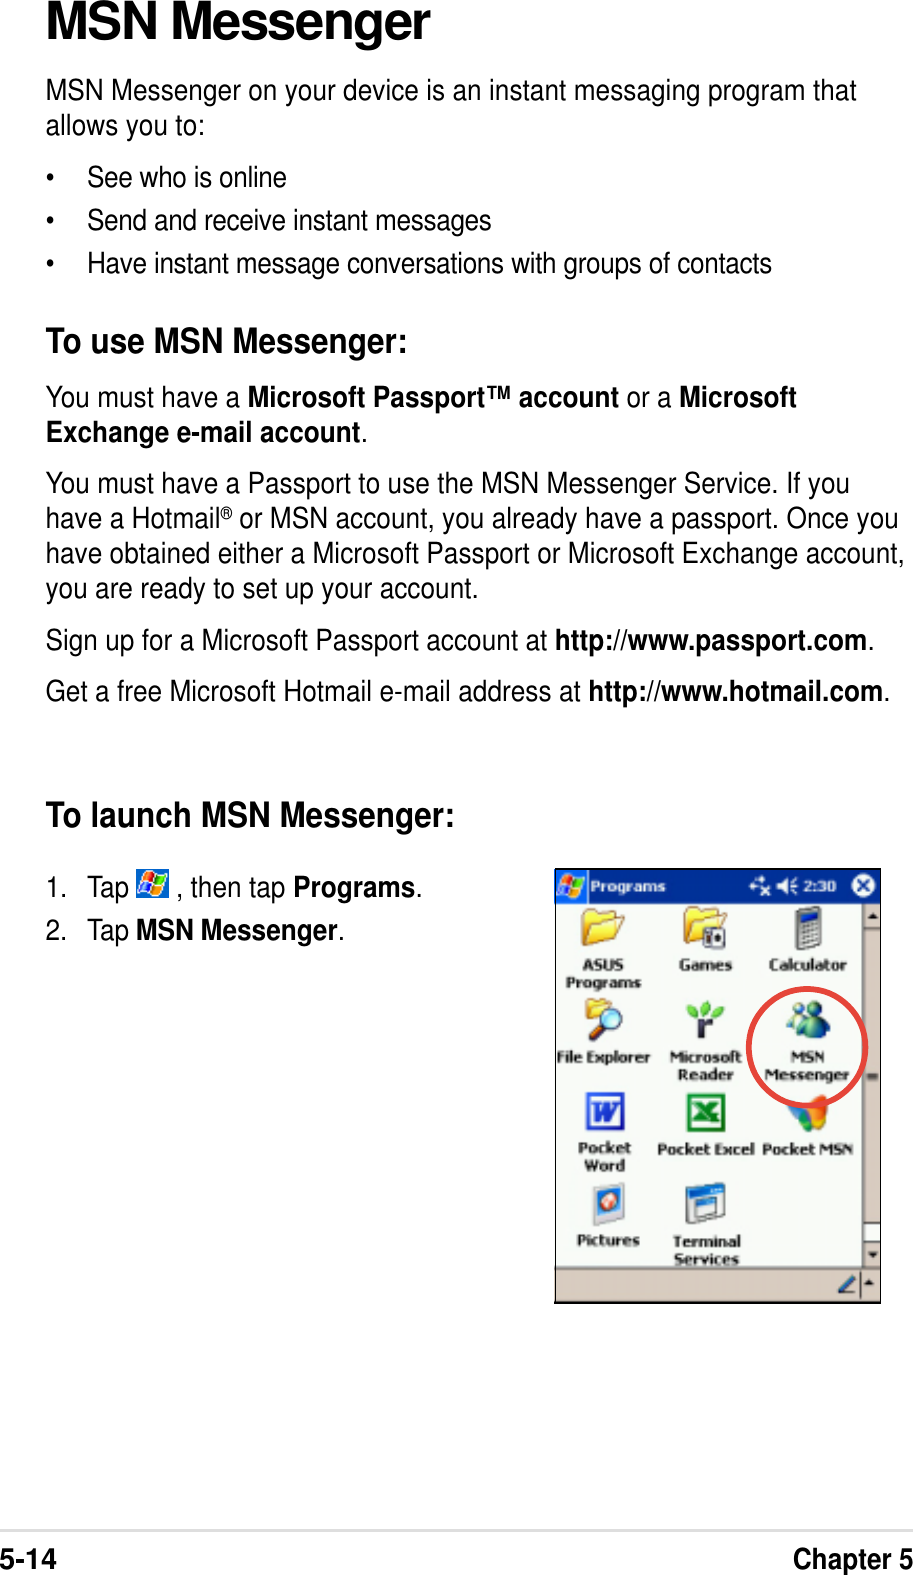 5-14Chapter 5MSN MessengerMSN Messenger on your device is an instant messaging program thatallows you to:•See who is online•Send and receive instant messages•Have instant message conversations with groups of contactsTo use MSN Messenger:You must have a Microsoft Passport™ account or a MicrosoftExchange e-mail account.You must have a Passport to use the MSN Messenger Service. If youhave a Hotmail® or MSN account, you already have a passport. Once youhave obtained either a Microsoft Passport or Microsoft Exchange account,you are ready to set up your account.Sign up for a Microsoft Passport account at http://www.passport.com.Get a free Microsoft Hotmail e-mail address at http://www.hotmail.com.To launch MSN Messenger:1. Tap   , then tap Programs.2. Tap MSN Messenger.